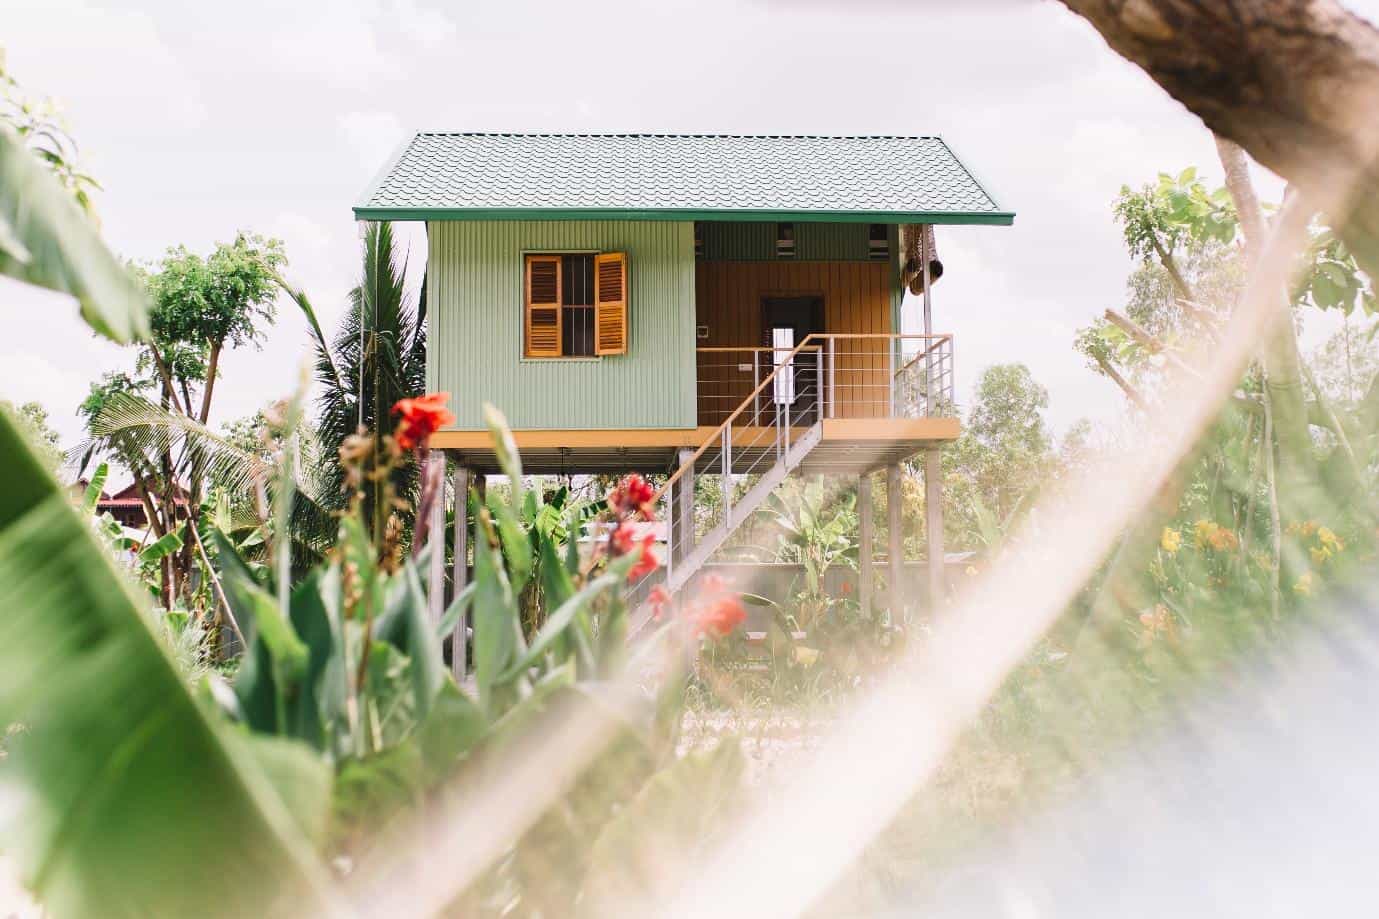 Mekong Homes is Changing The Face Of Rural Communities Through Affordable Housing